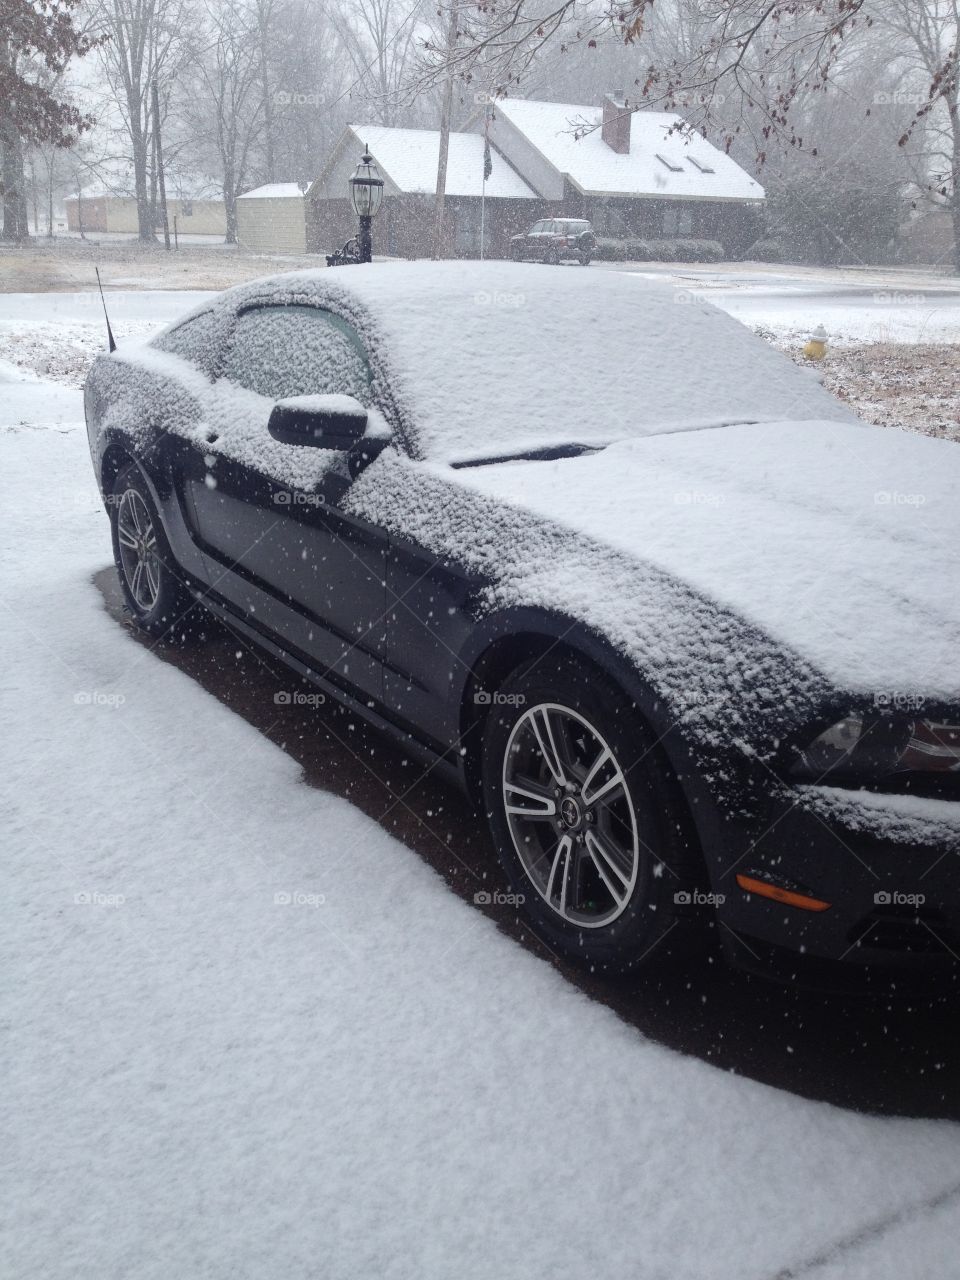 Snow covered Ford Mustang.